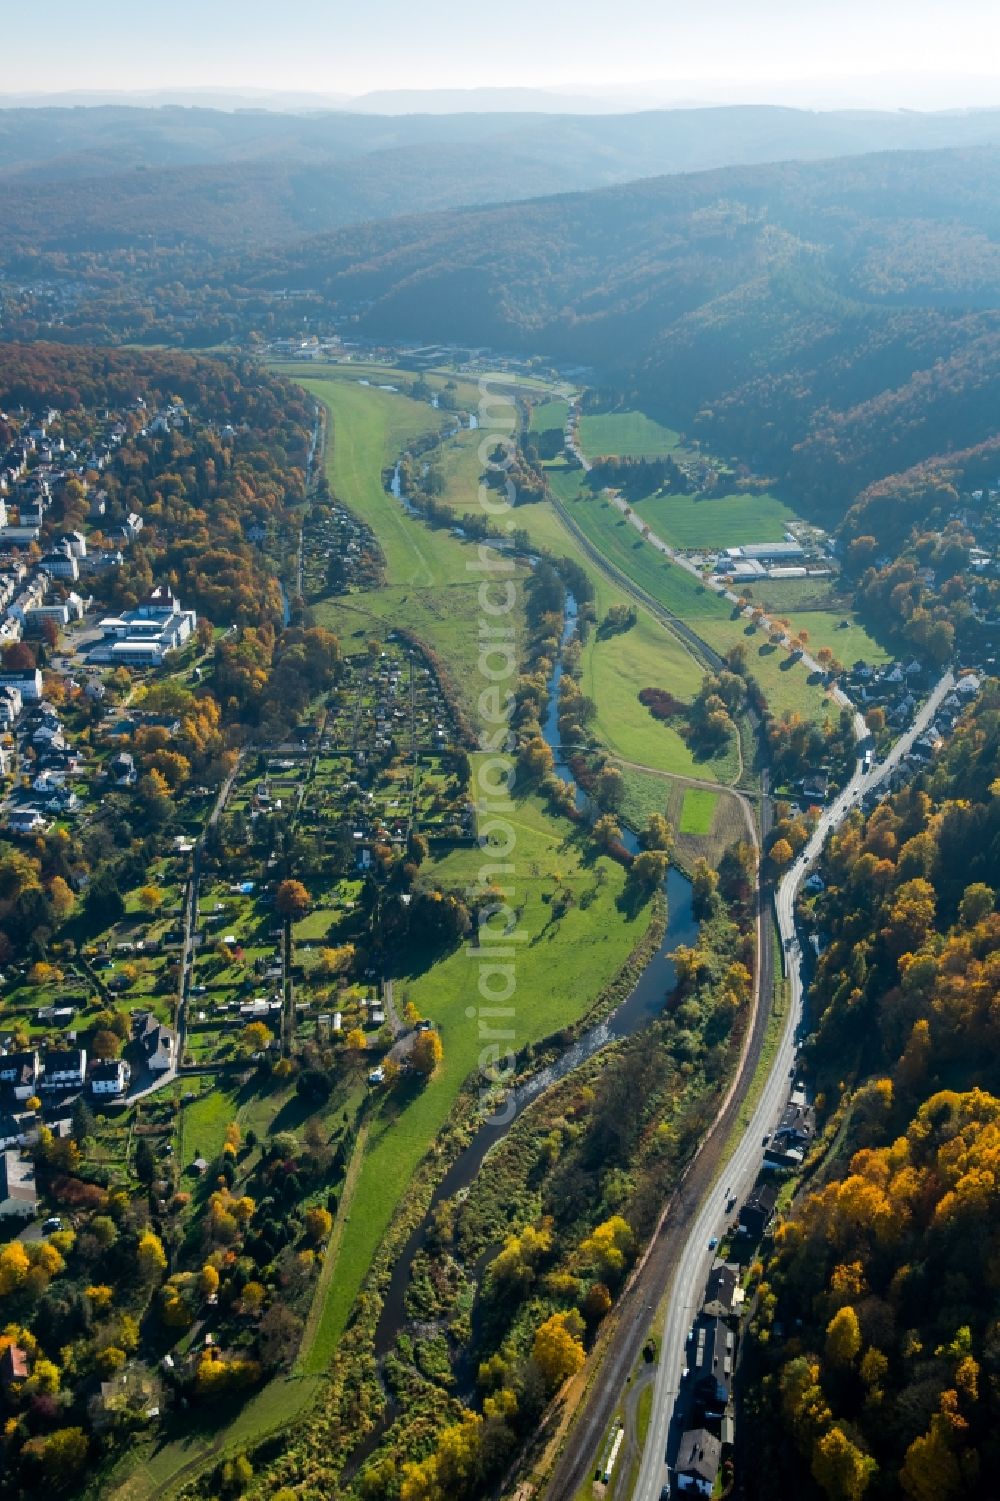 Aerial image Arnsberg - Ruhr valley in the West of Arnsberg in the state óf North Rhine-Westphalia. The river Ruhr takes its course on the edge of the town along a forest and hill